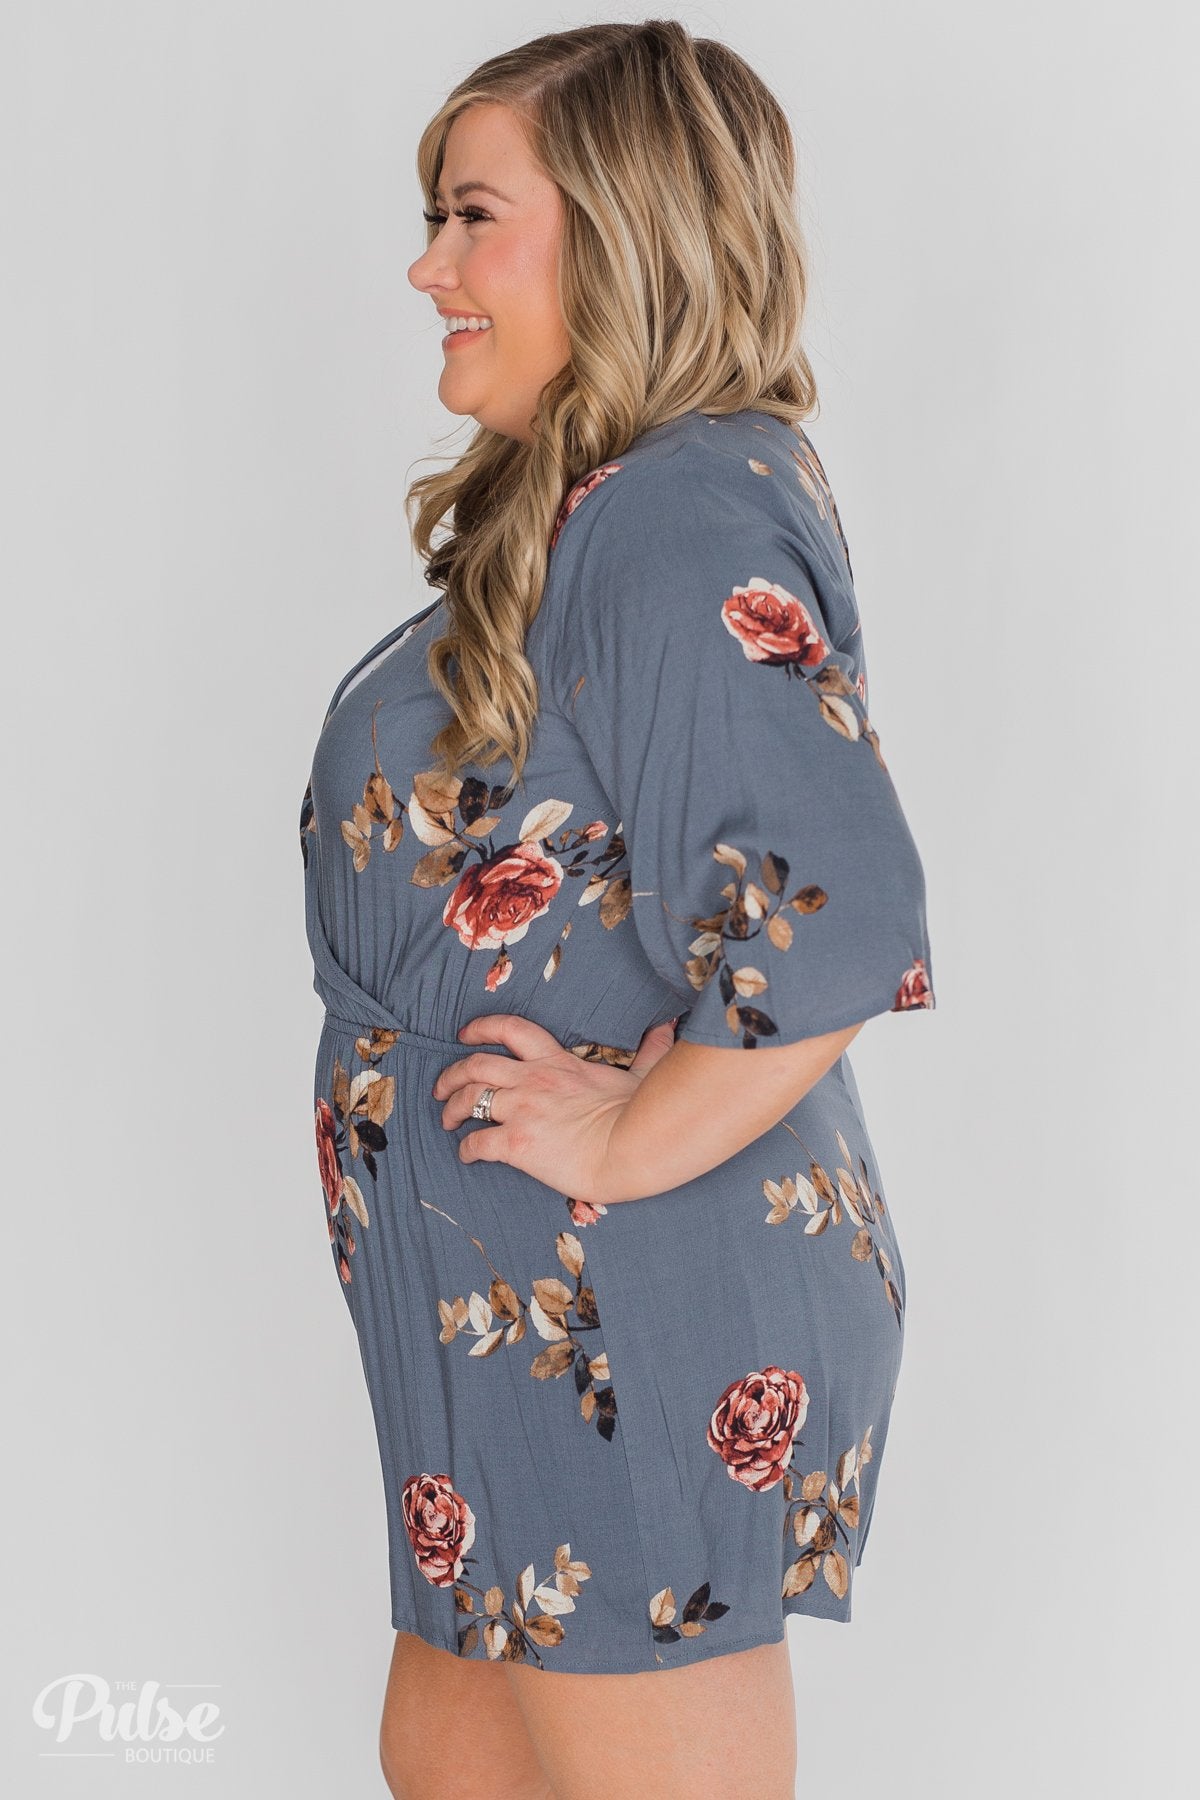 Bloom Where You're Planted Floral Romper - Steel Blue